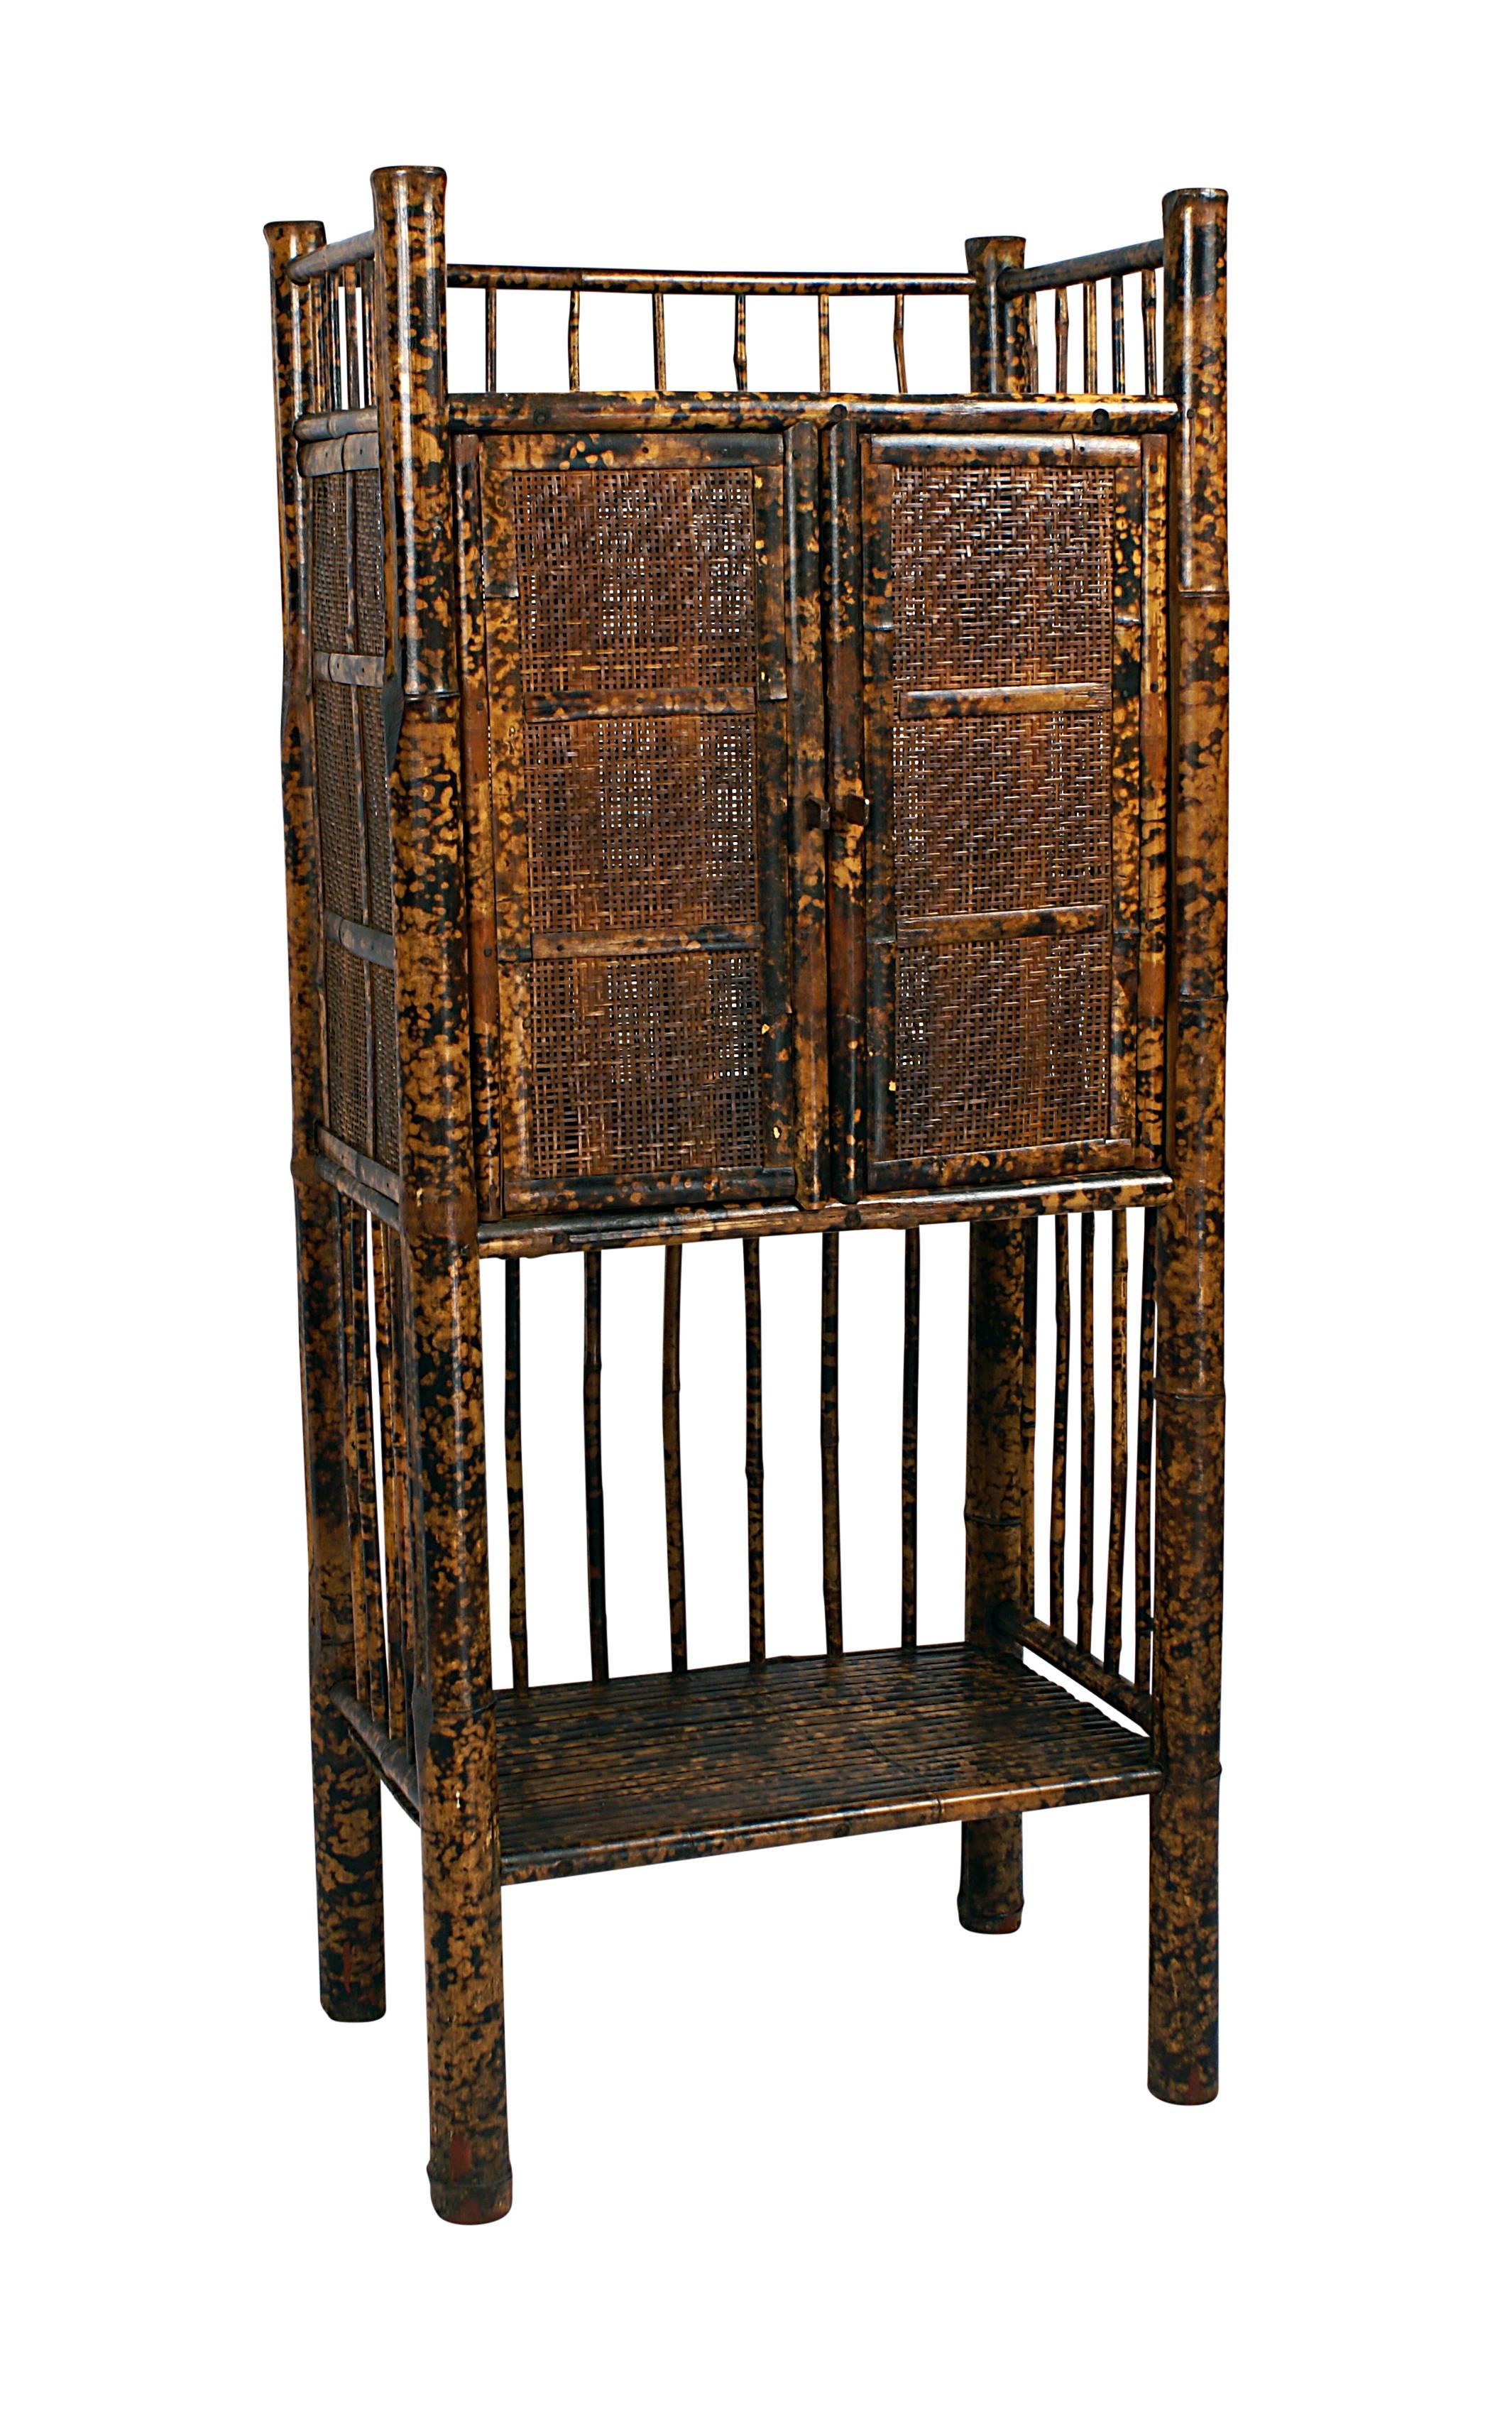 A rare example of Provincial Chinese tortoise shell bamboo furniture. The Chinese liked bamboo furniture because of its weight, durability and decorative qualities. This was collected about 30 years ago. Has been recently polished. Good old rich